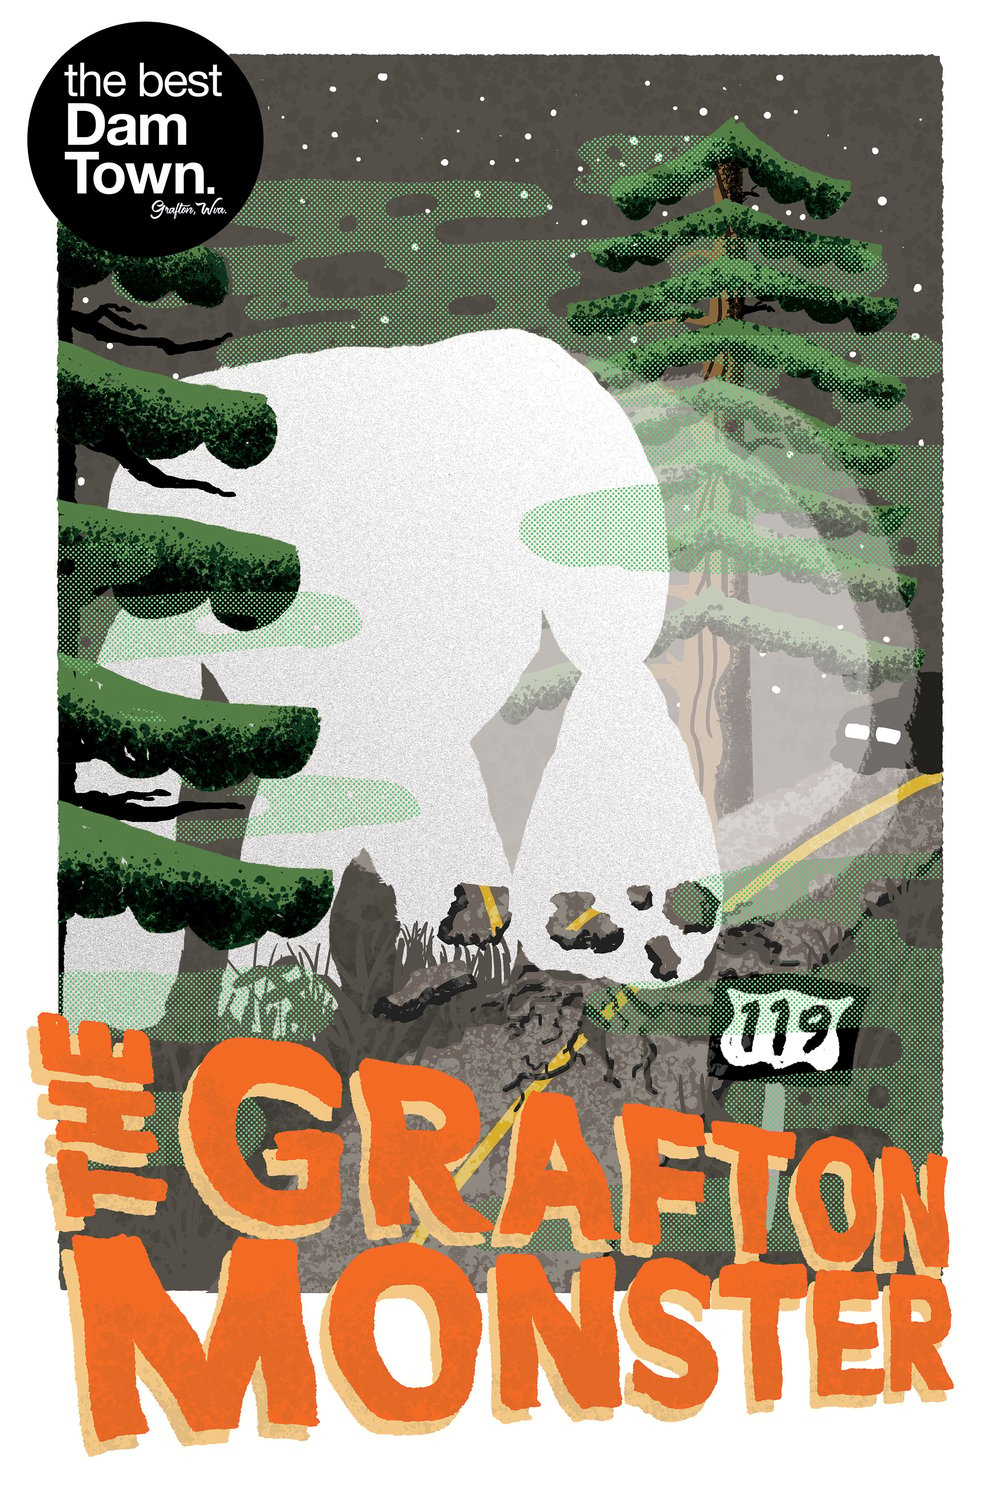 Image of The Grafton Monster 24 x 36" Limited Edition Print